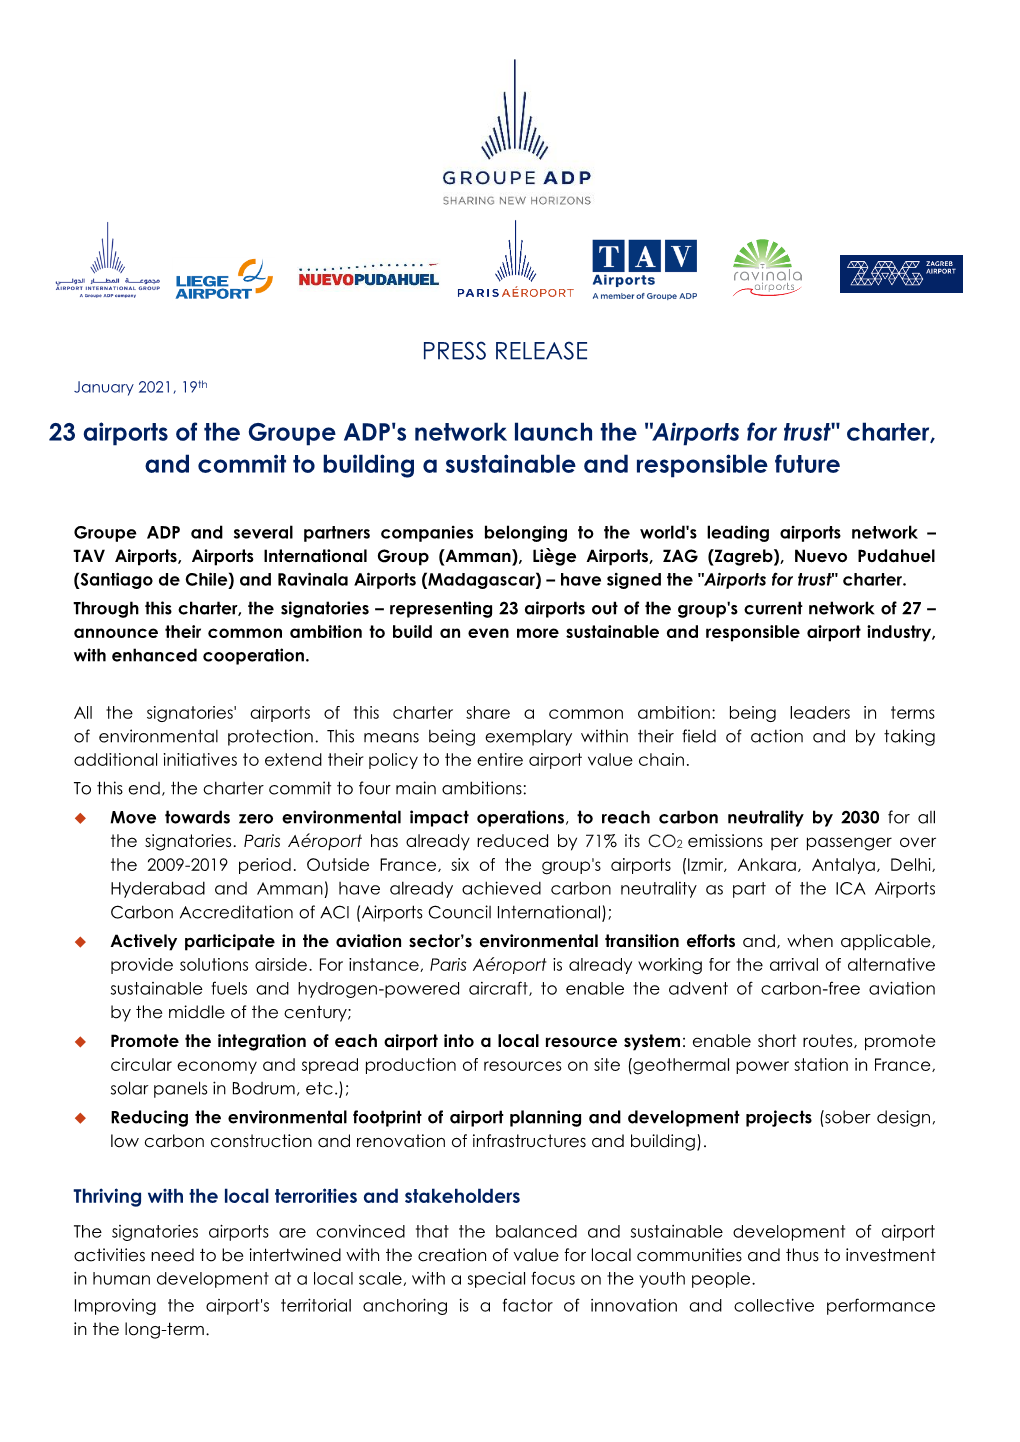 PRESS RELEASE 23 Airports of The